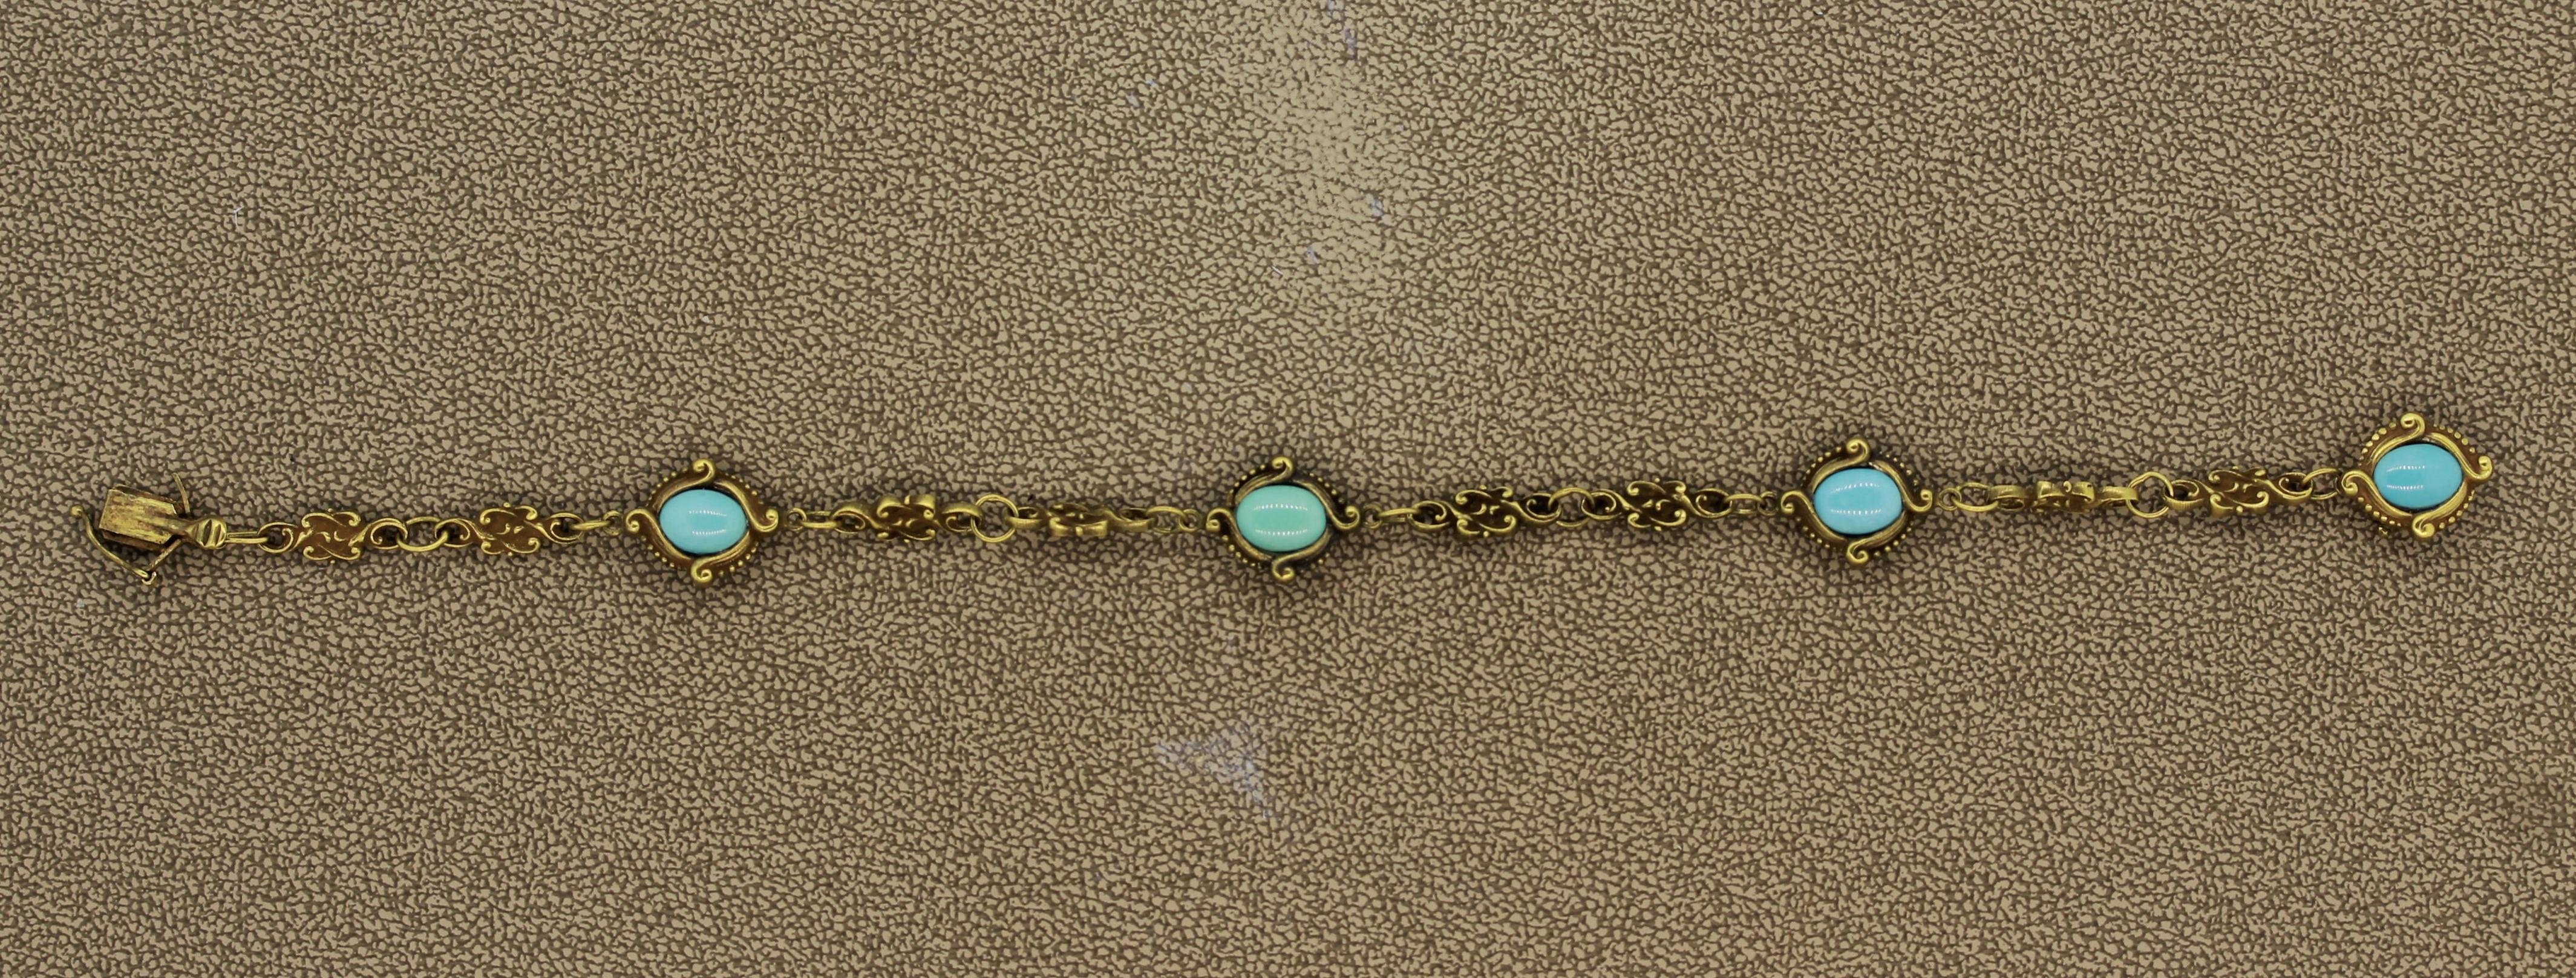 A classic piece for the Art Nouveau era in the early 1900’s, this sweet bracelet features 4 pieces of fine sky blue turquoise. Hand made in 14k yellow gold with detailed filigree design on each link and around each turquoise. 


Length: 8 inches